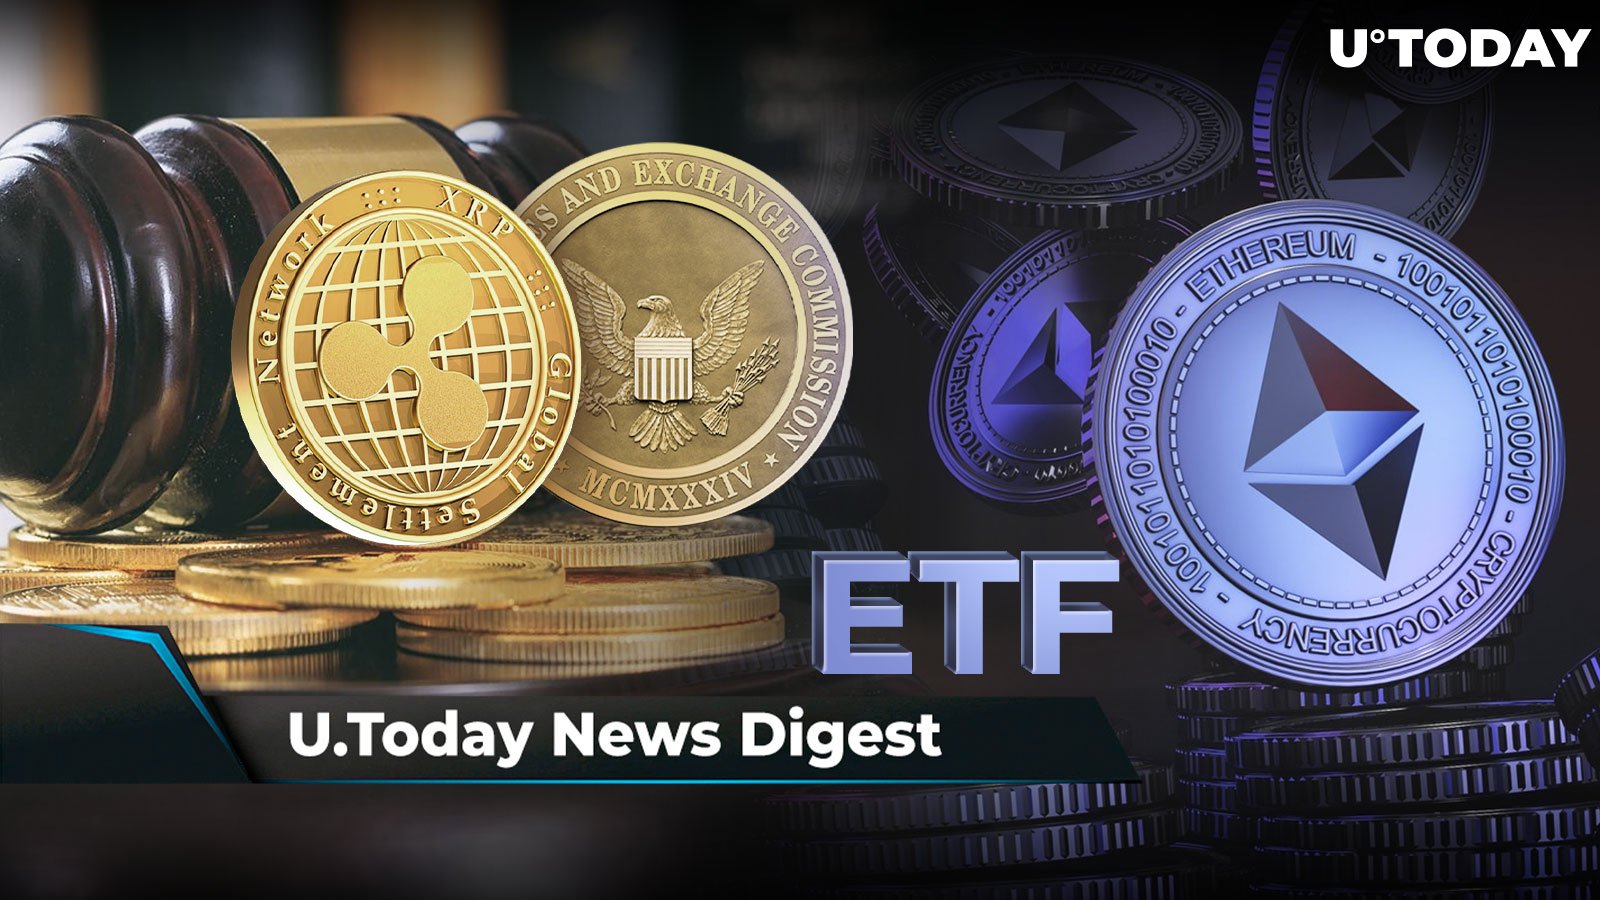 Here's Next Key Deadline in Ripple v. SEC Case, Bloomberg Expert Doubts Ethereum ETF Launch in March, Tron Founder Makes Mystery $500 Million Transfer: Crypto News Digest by U.Today